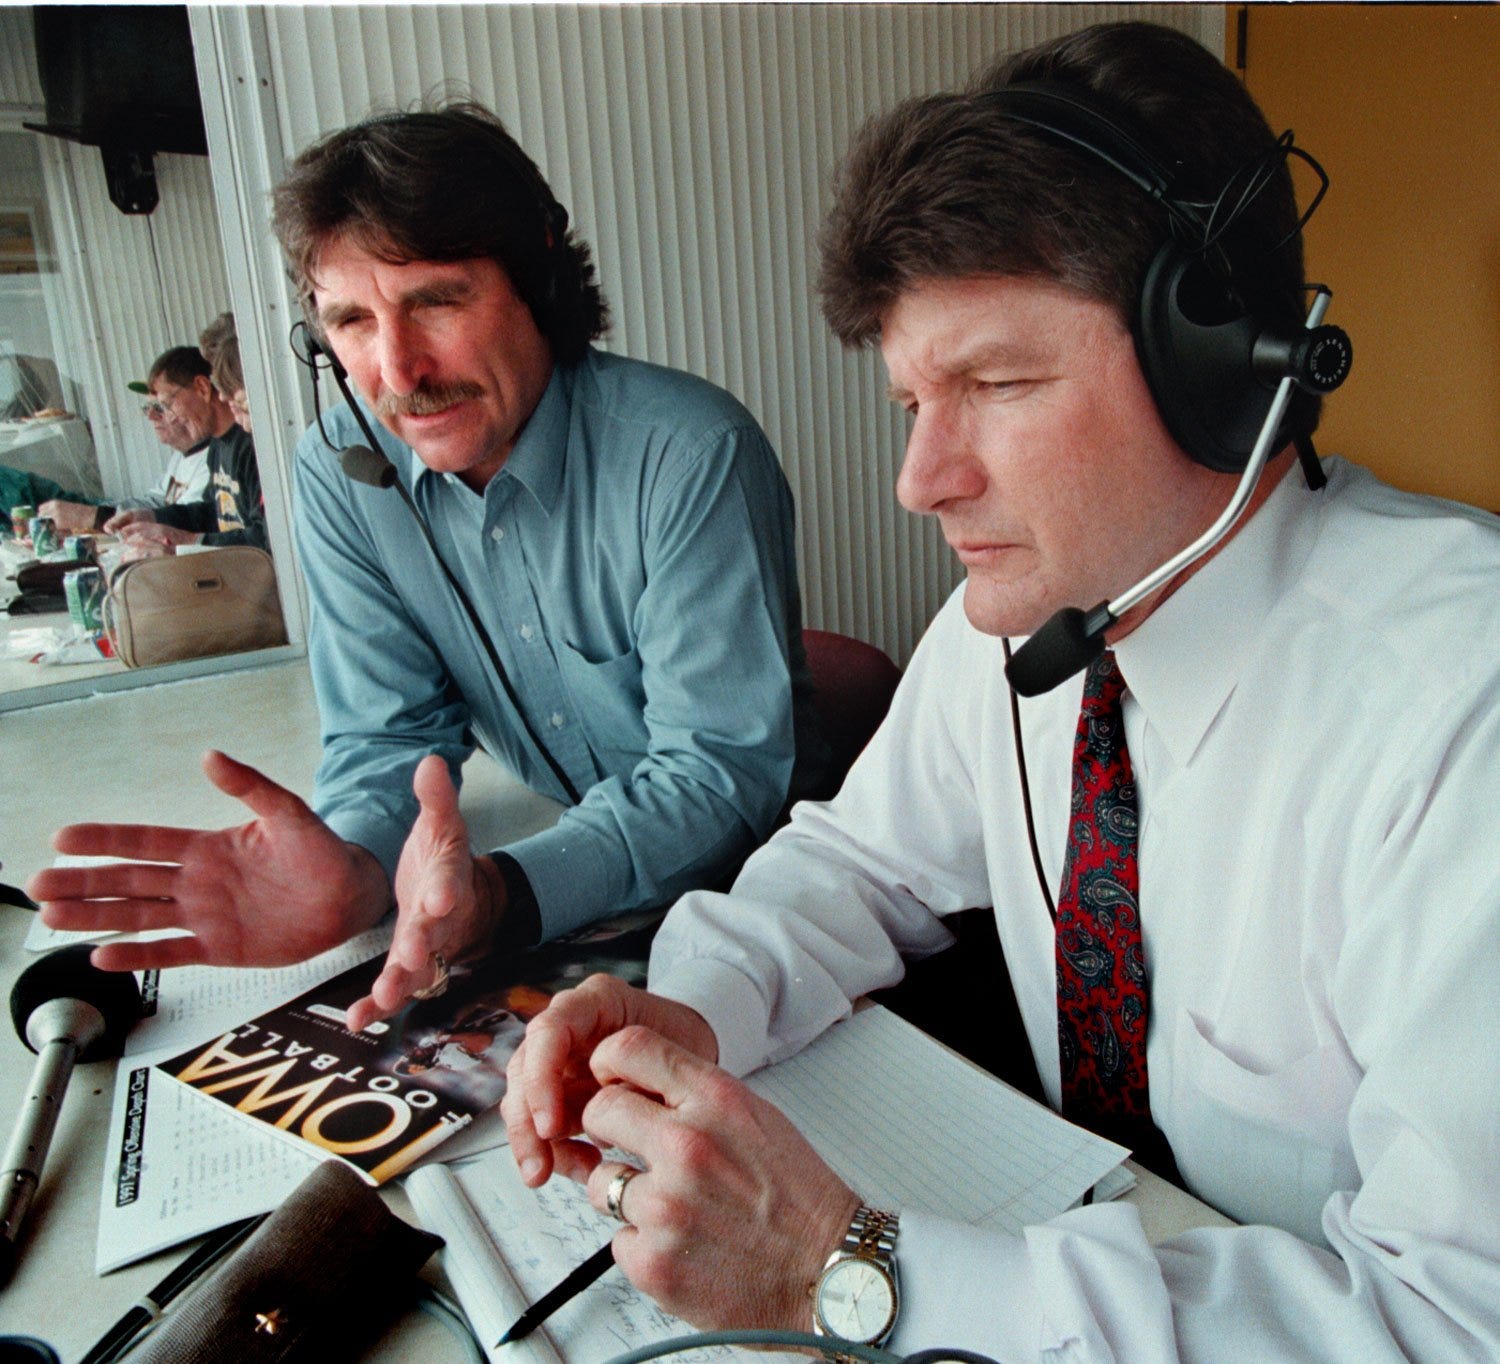 From 1997: Ed Podolak, left, works with new Iowa football play-by-play announcer Gary Dolphin before a Hawkeye spring football game.